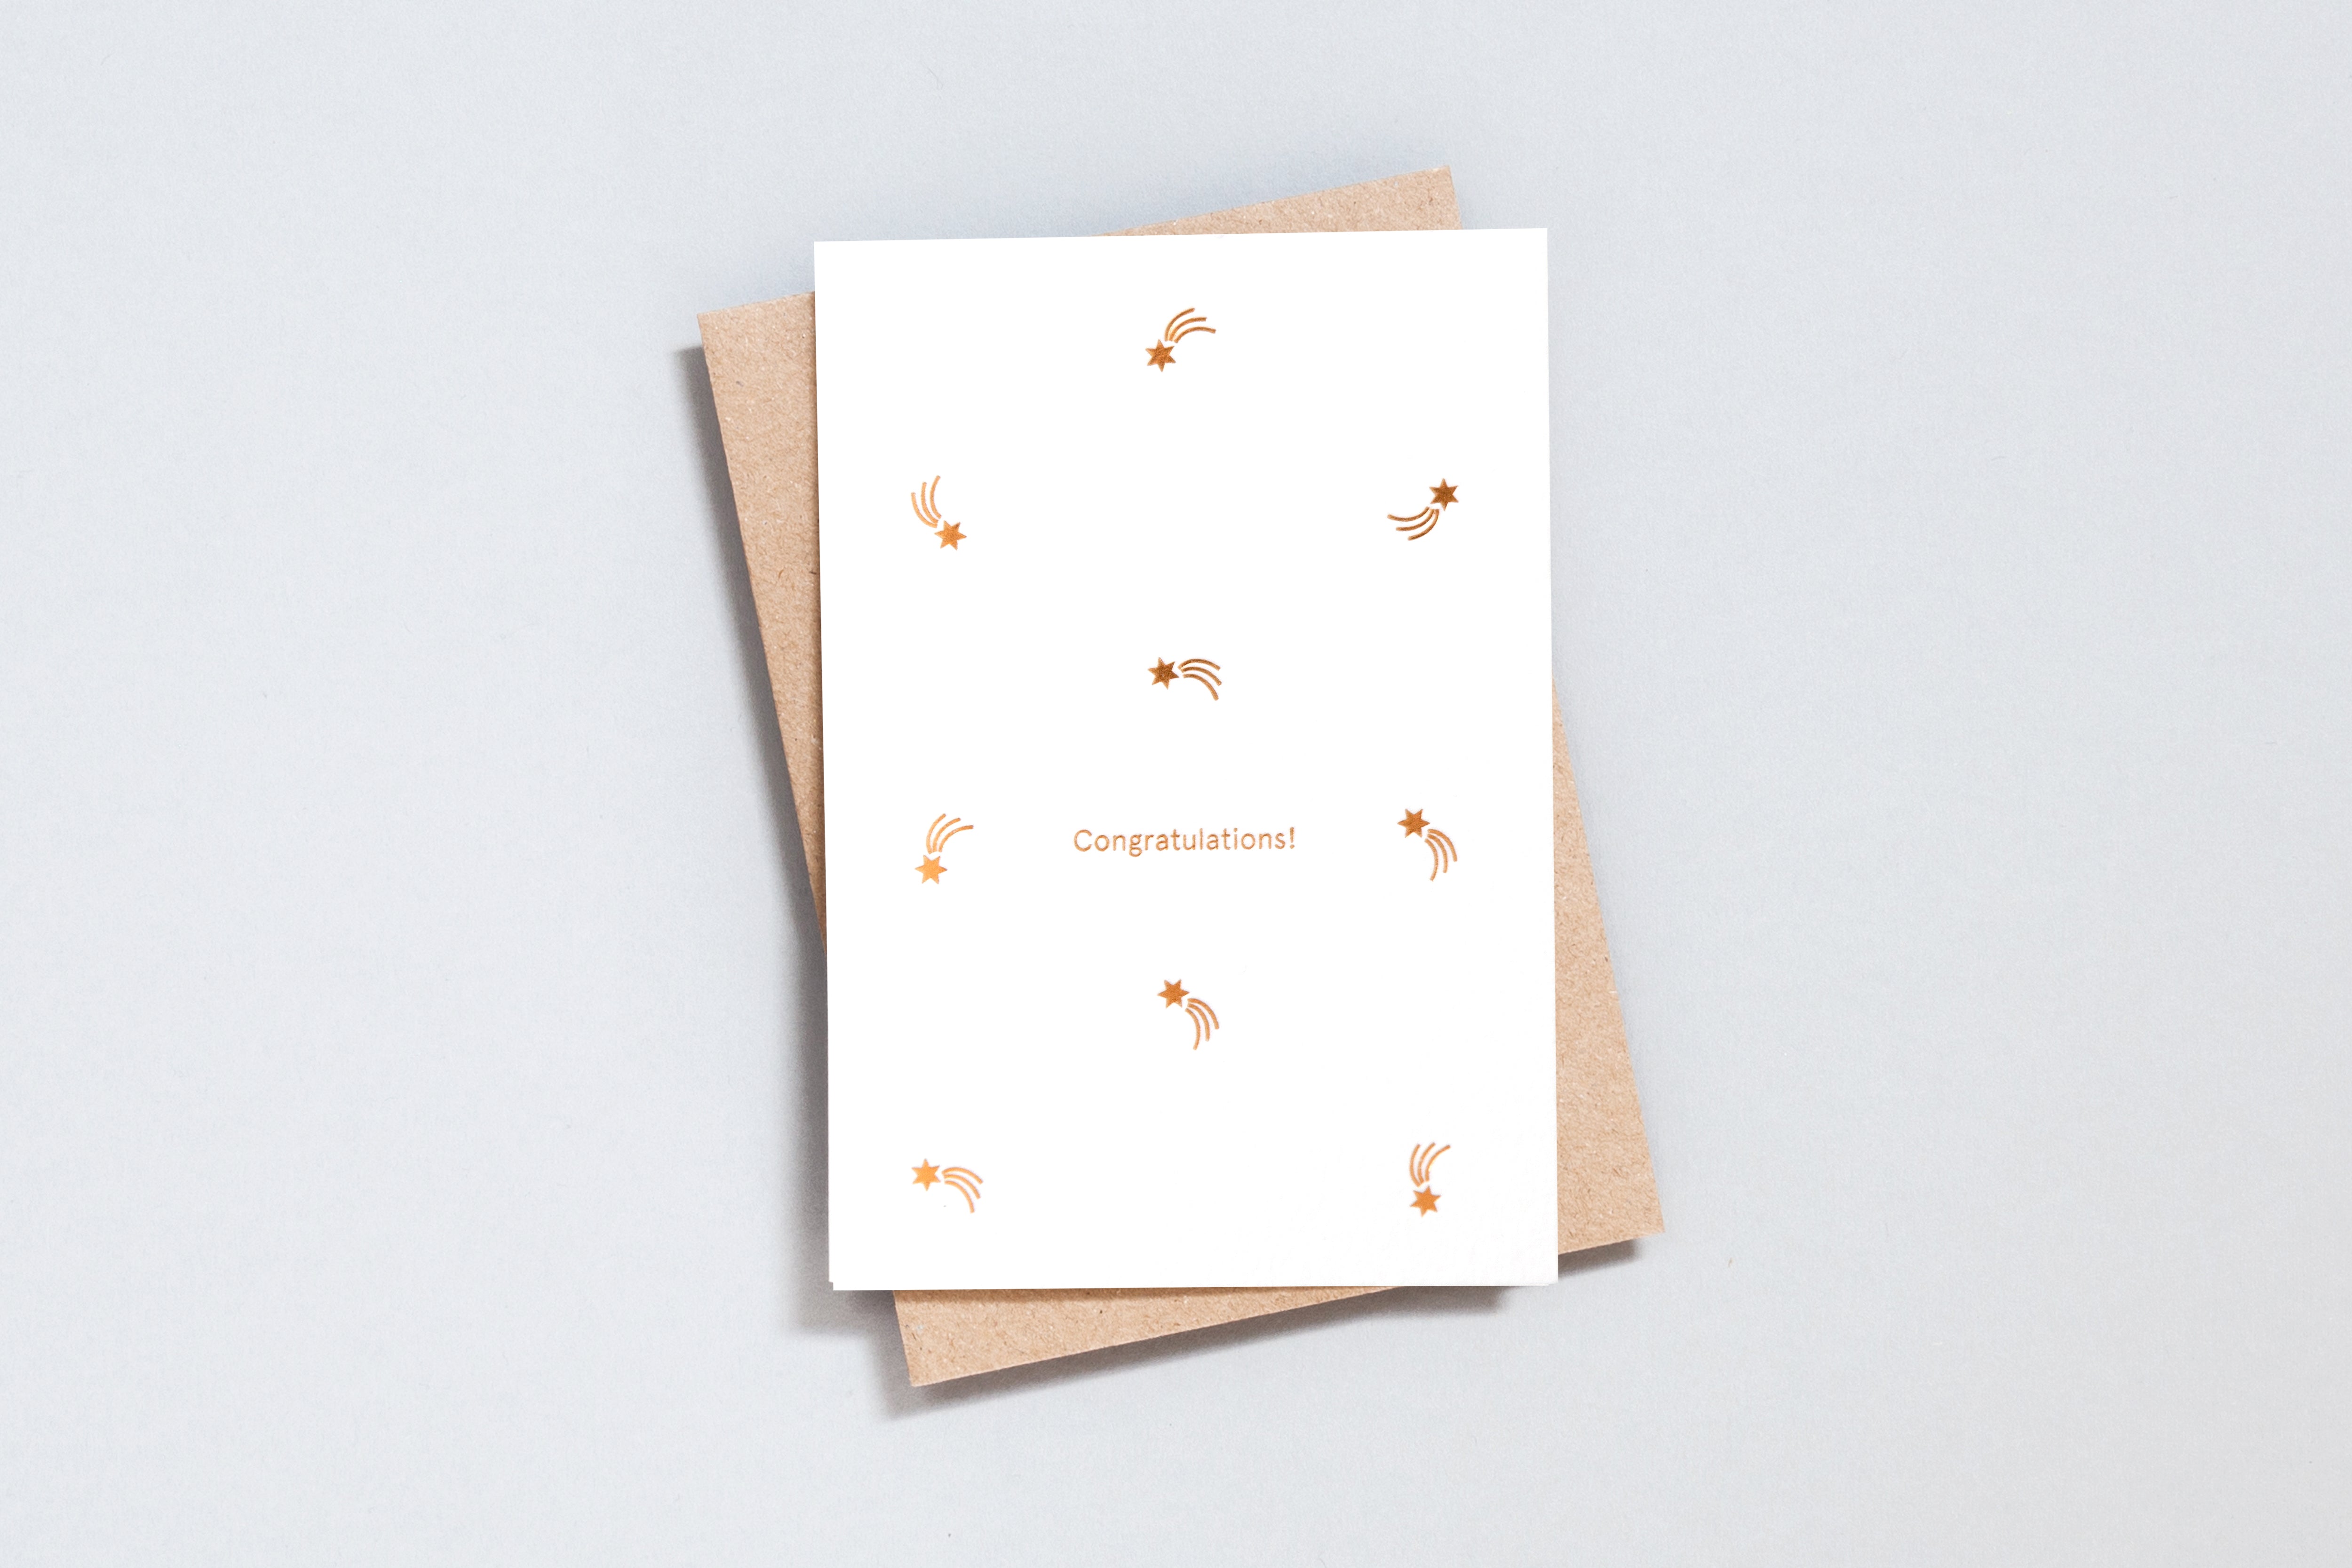 Congratulations Card | Copper on Cotton White | Foil Blocked | by Ola - Lifestory - ola